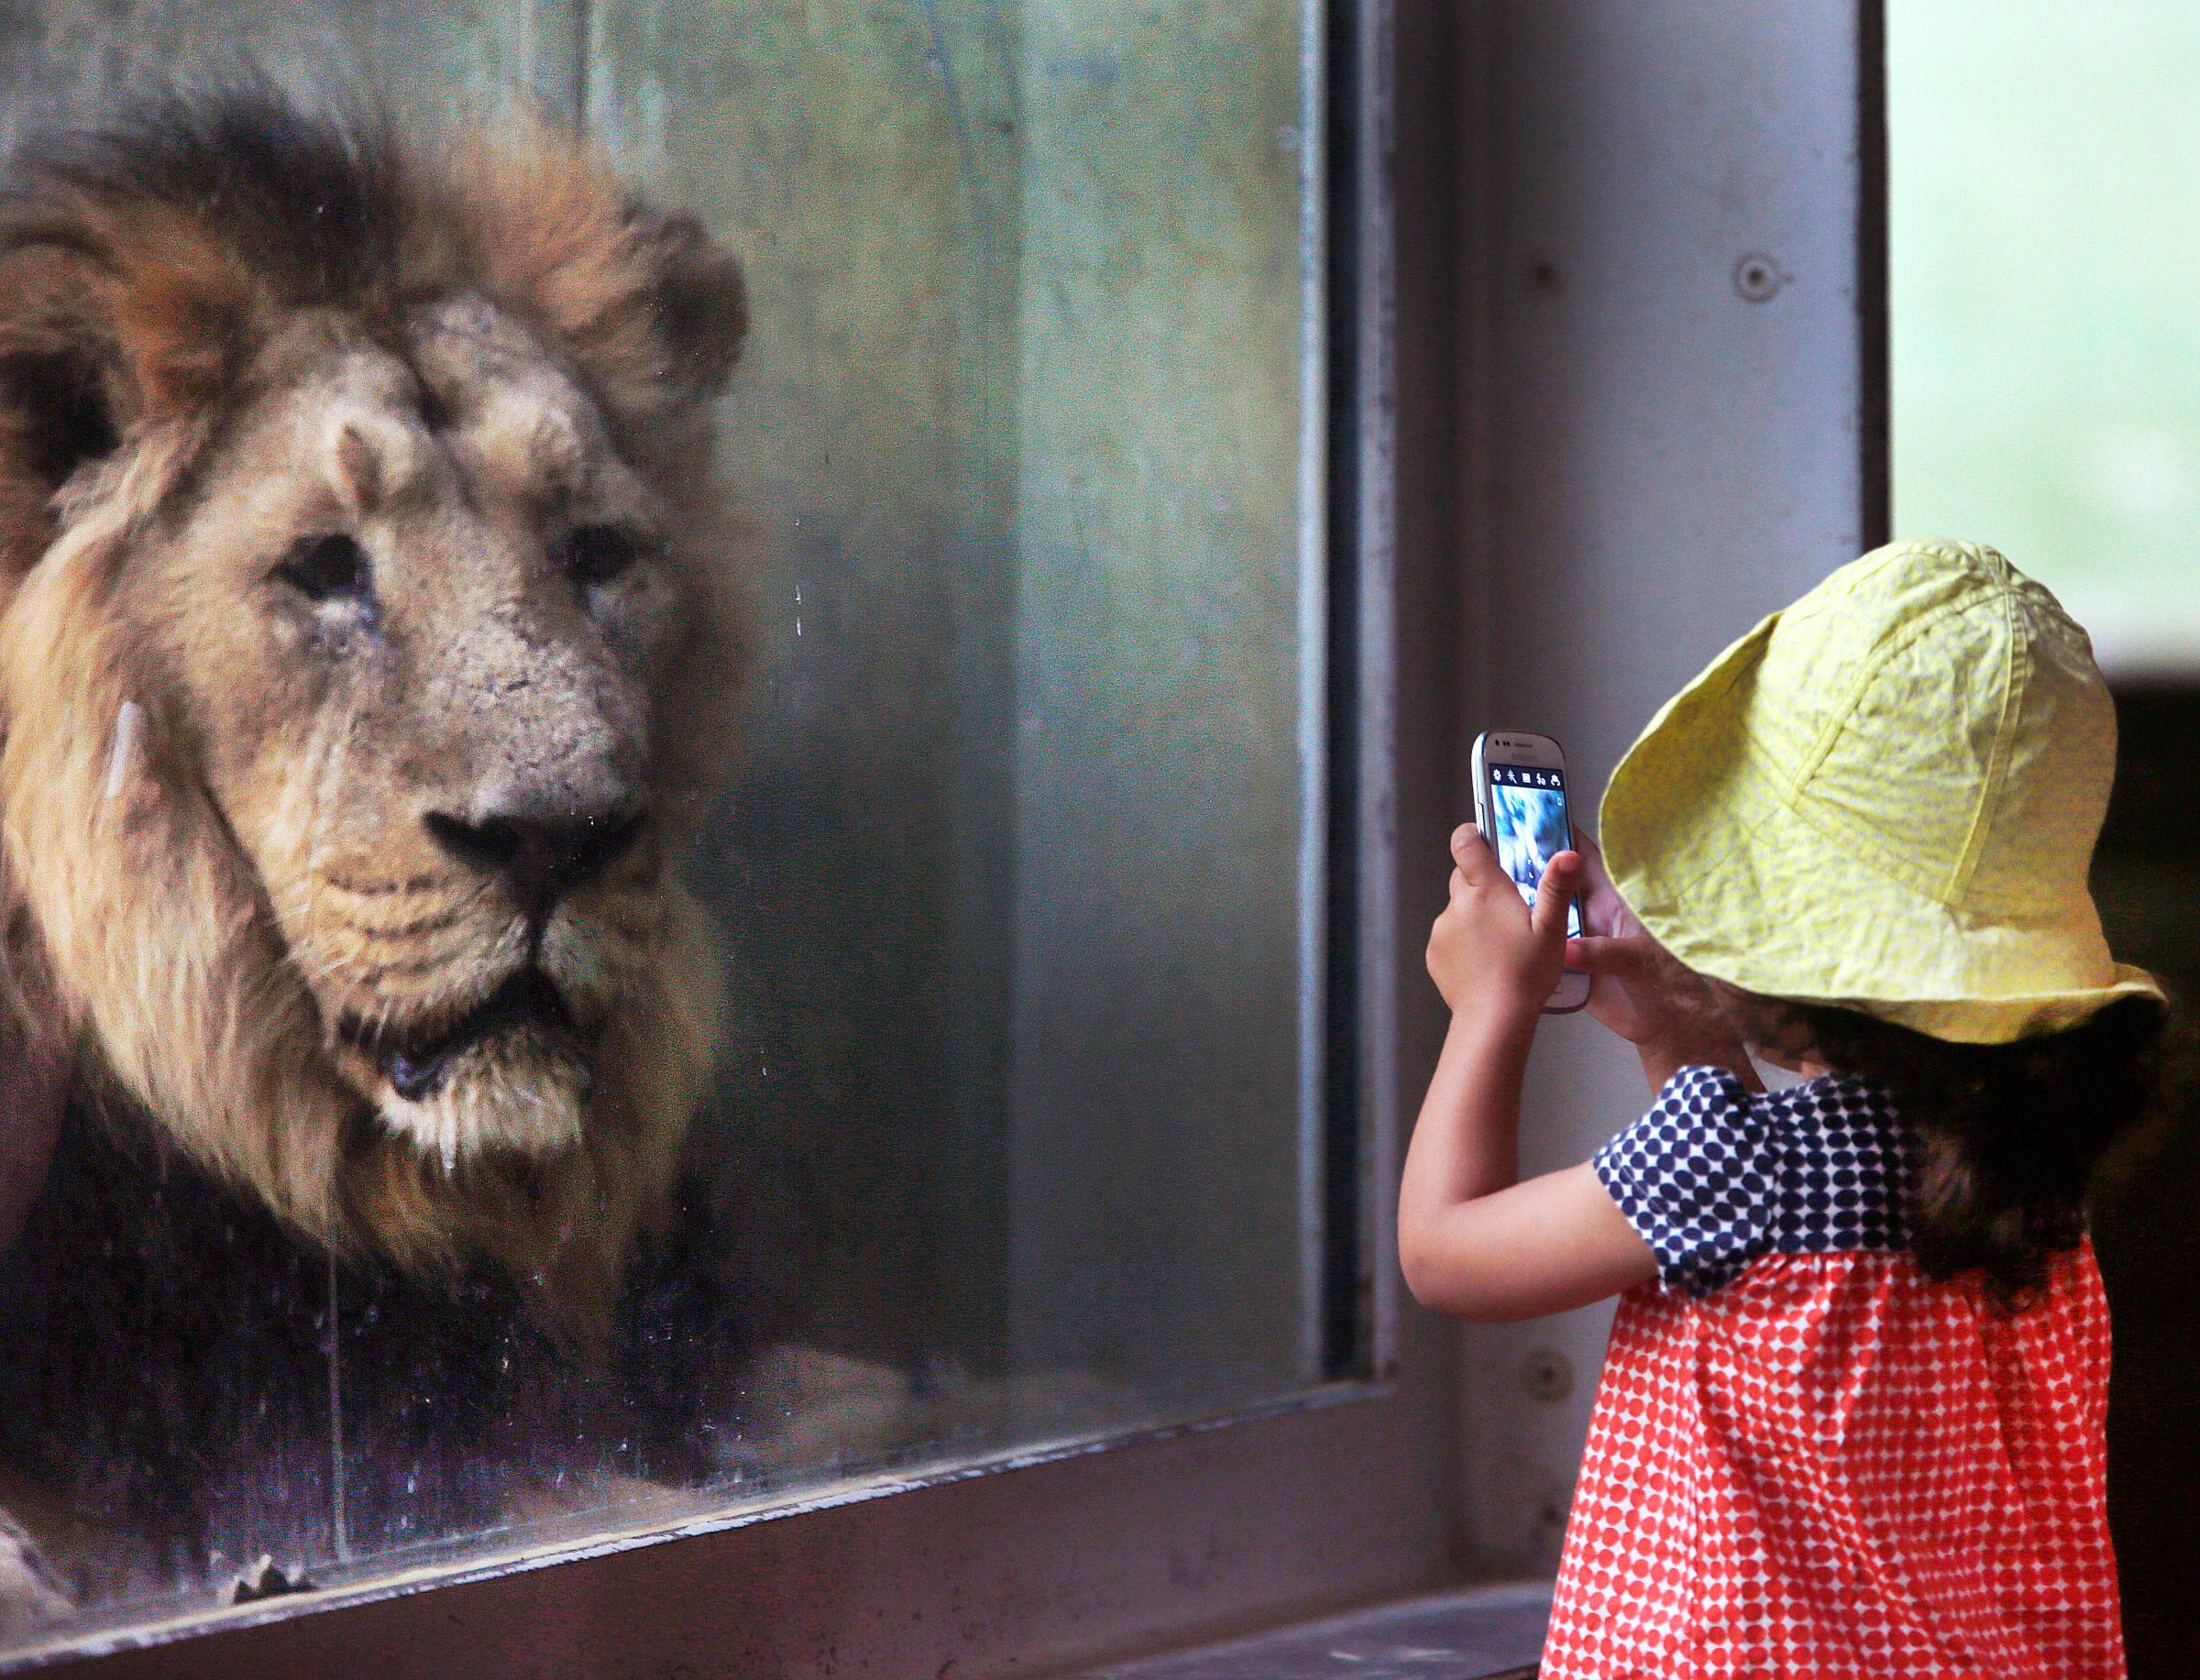 A little girl takes a picture of a lion in the zoo in Frankfurt, Germany, on Sept. 13, 2016.